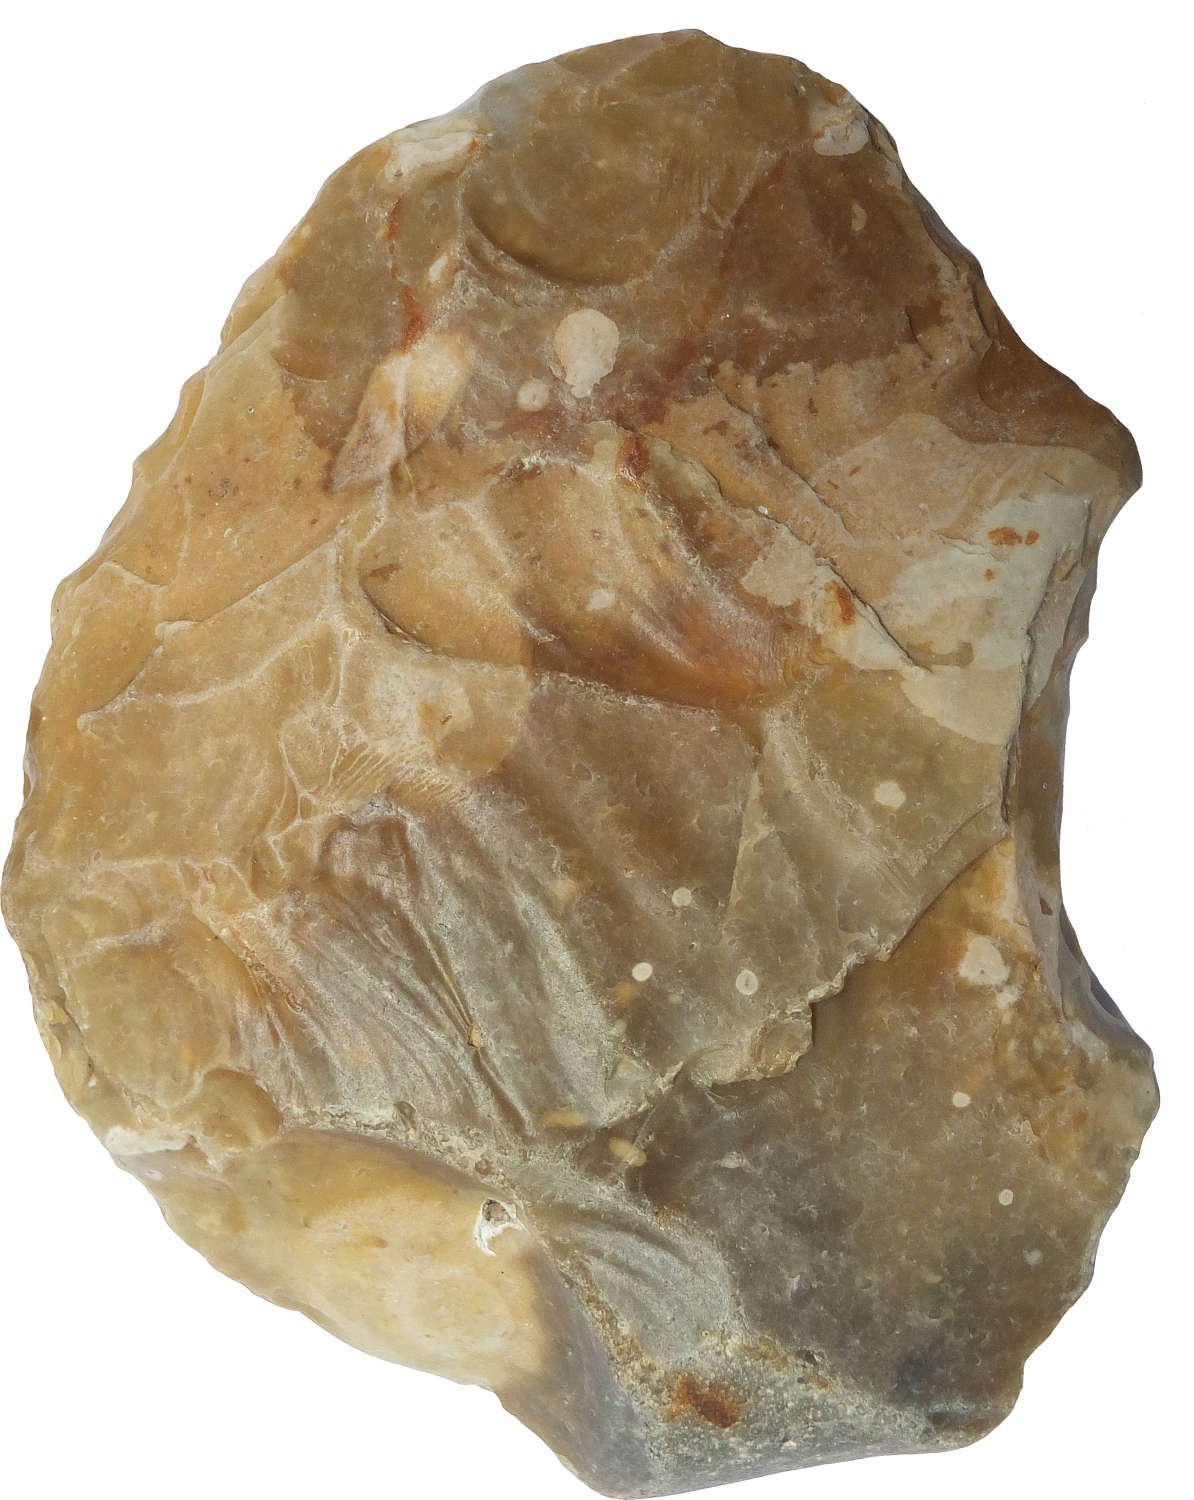 A Lower Palaeolithic flint ovate handaxe, c. 350,000 years B.P.